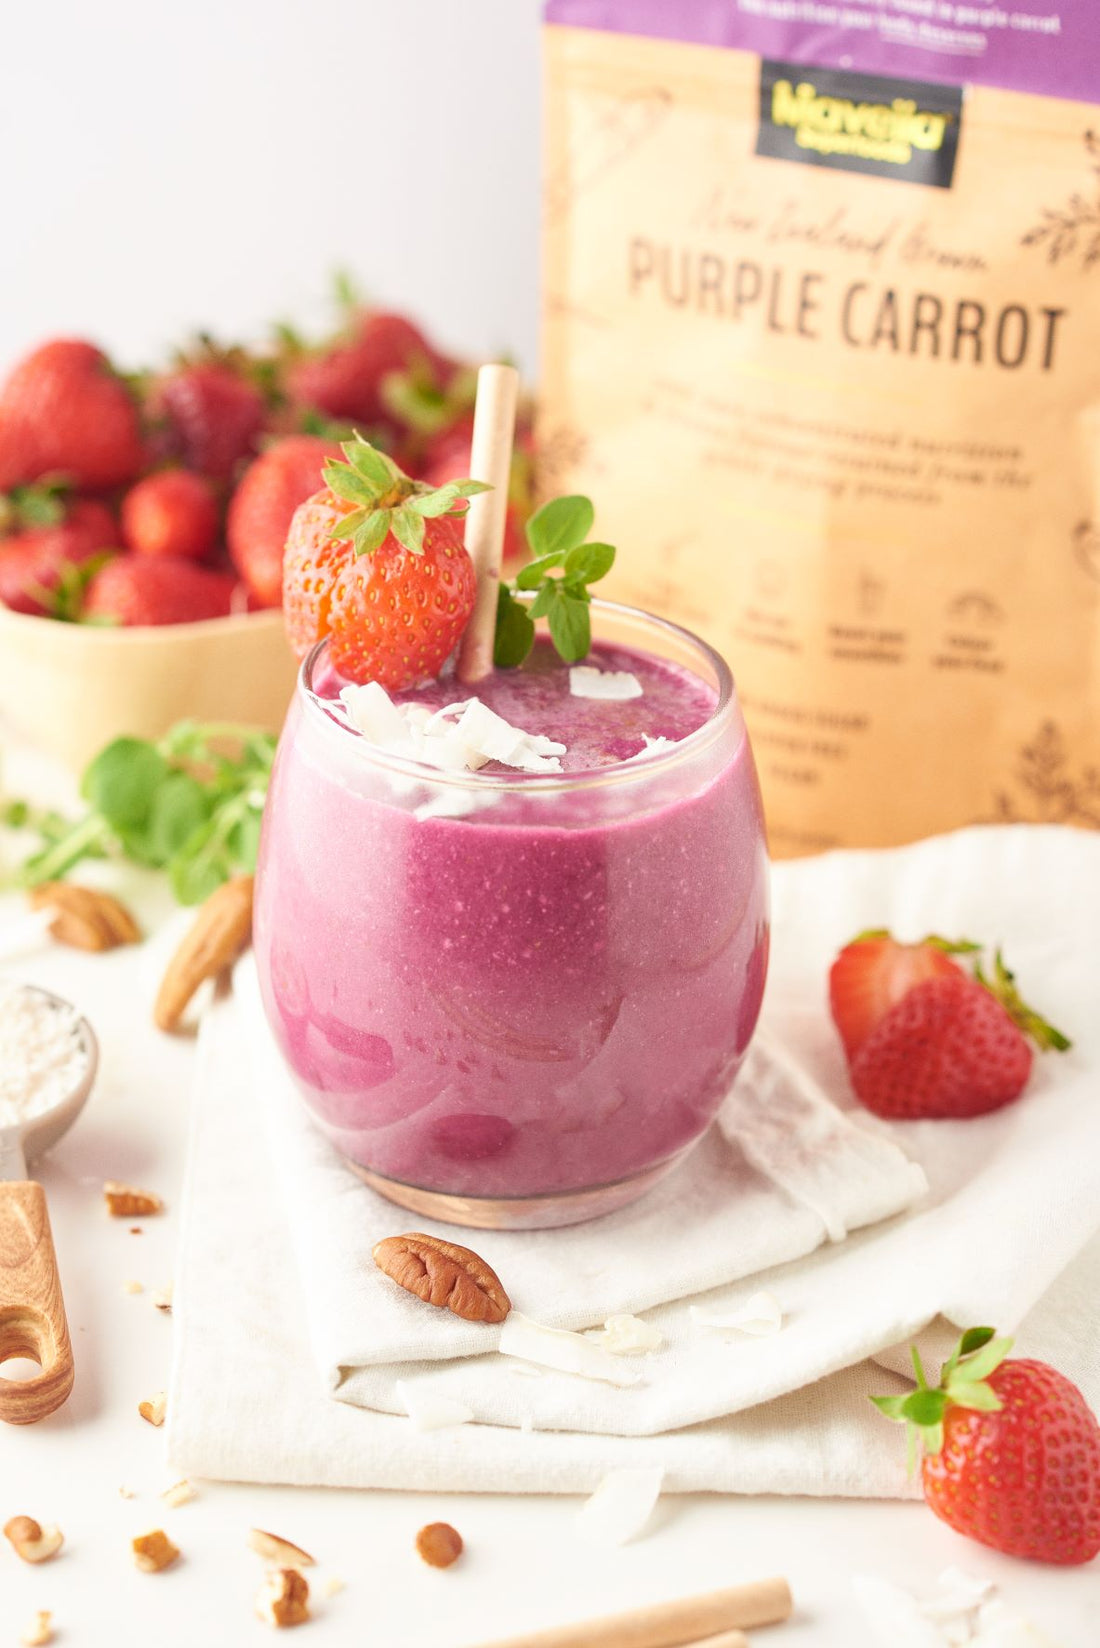 Strawberry Purple Carrot Smoothie